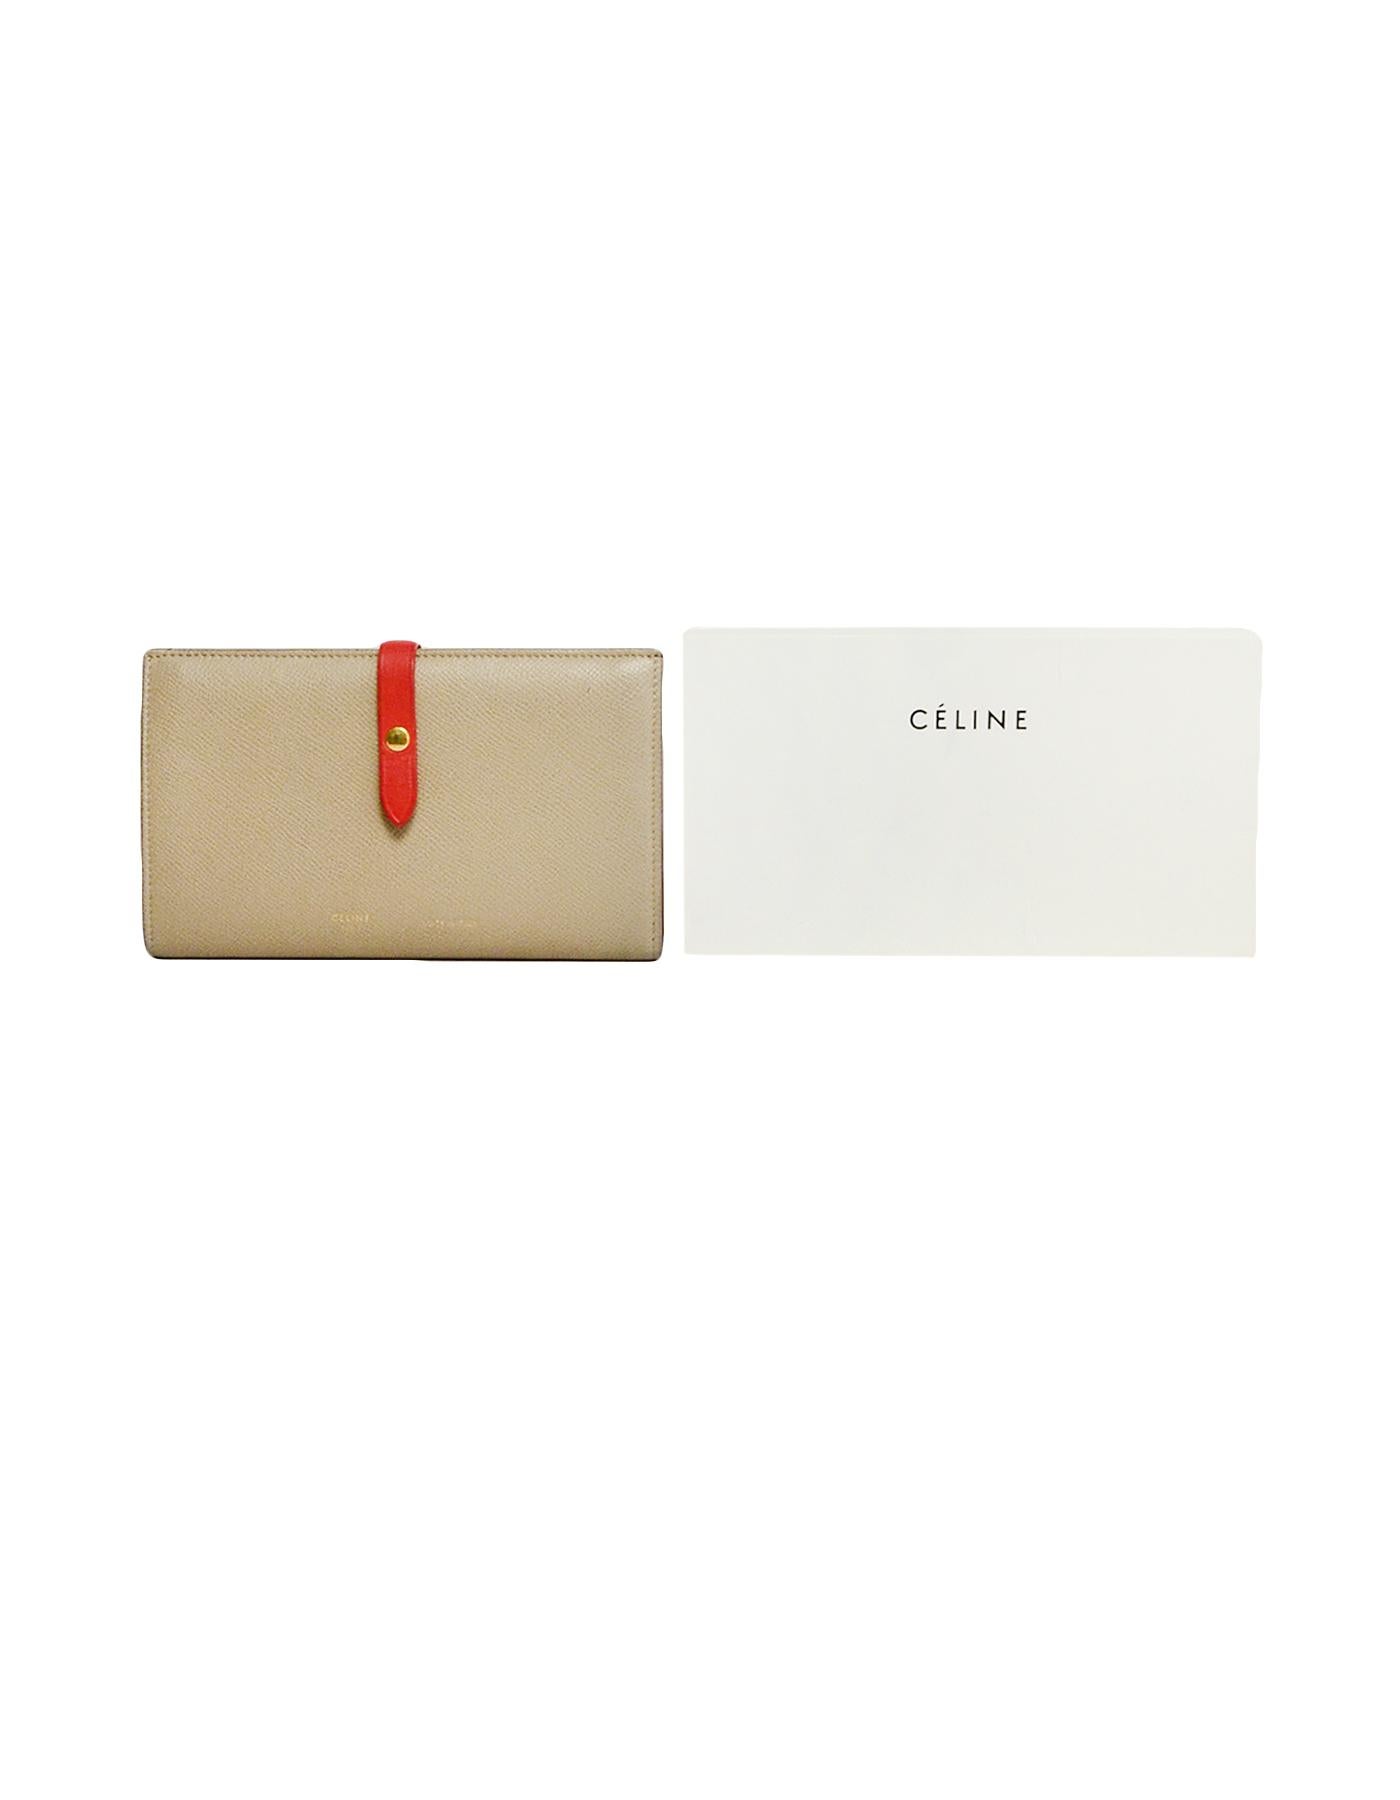 Celine Taupe/Red Grained Calfskin Large Multifunction Strap Wallet rt $810 3